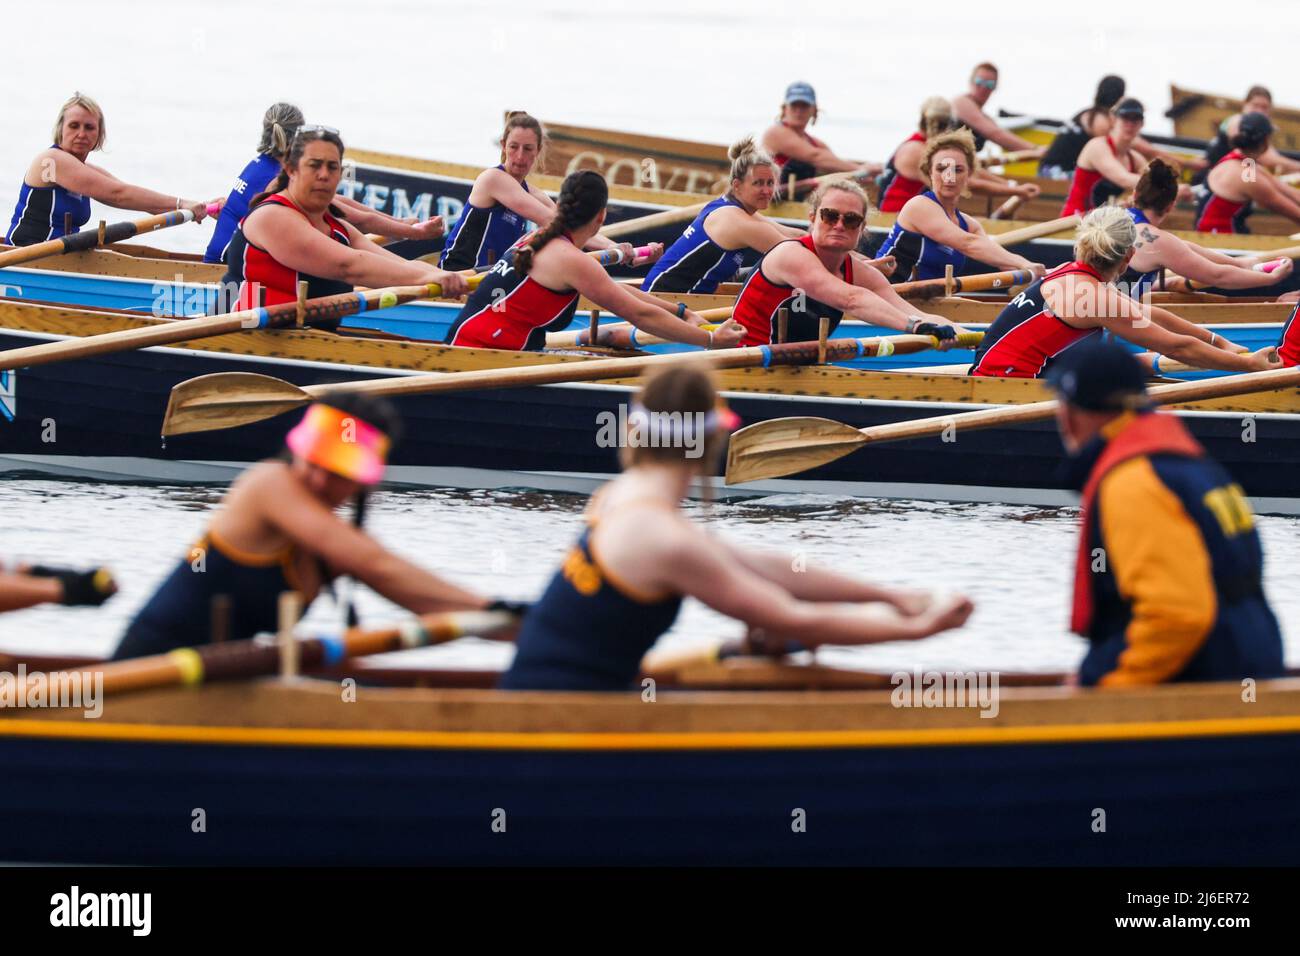 Women compete during the World Pilot Gig rowing Championships from Nut Rock to St. Mary's, in the Isles of Scilly, Britain, May 1, 2022. REUTERS/Tom Nicholson Stock Photo